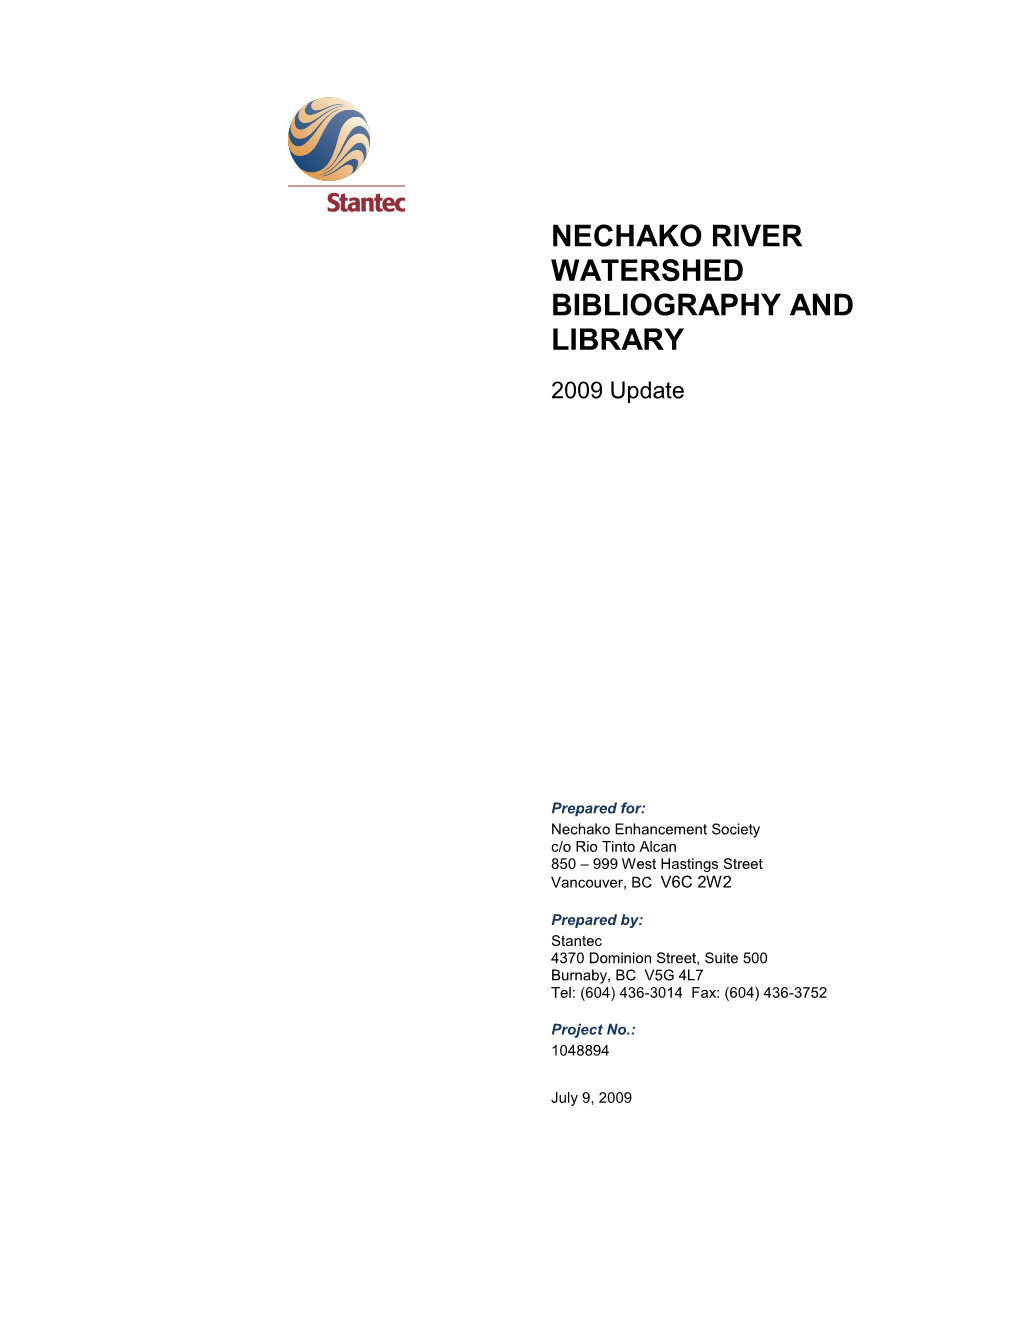 Nechako River Watershed Bibliography and Library